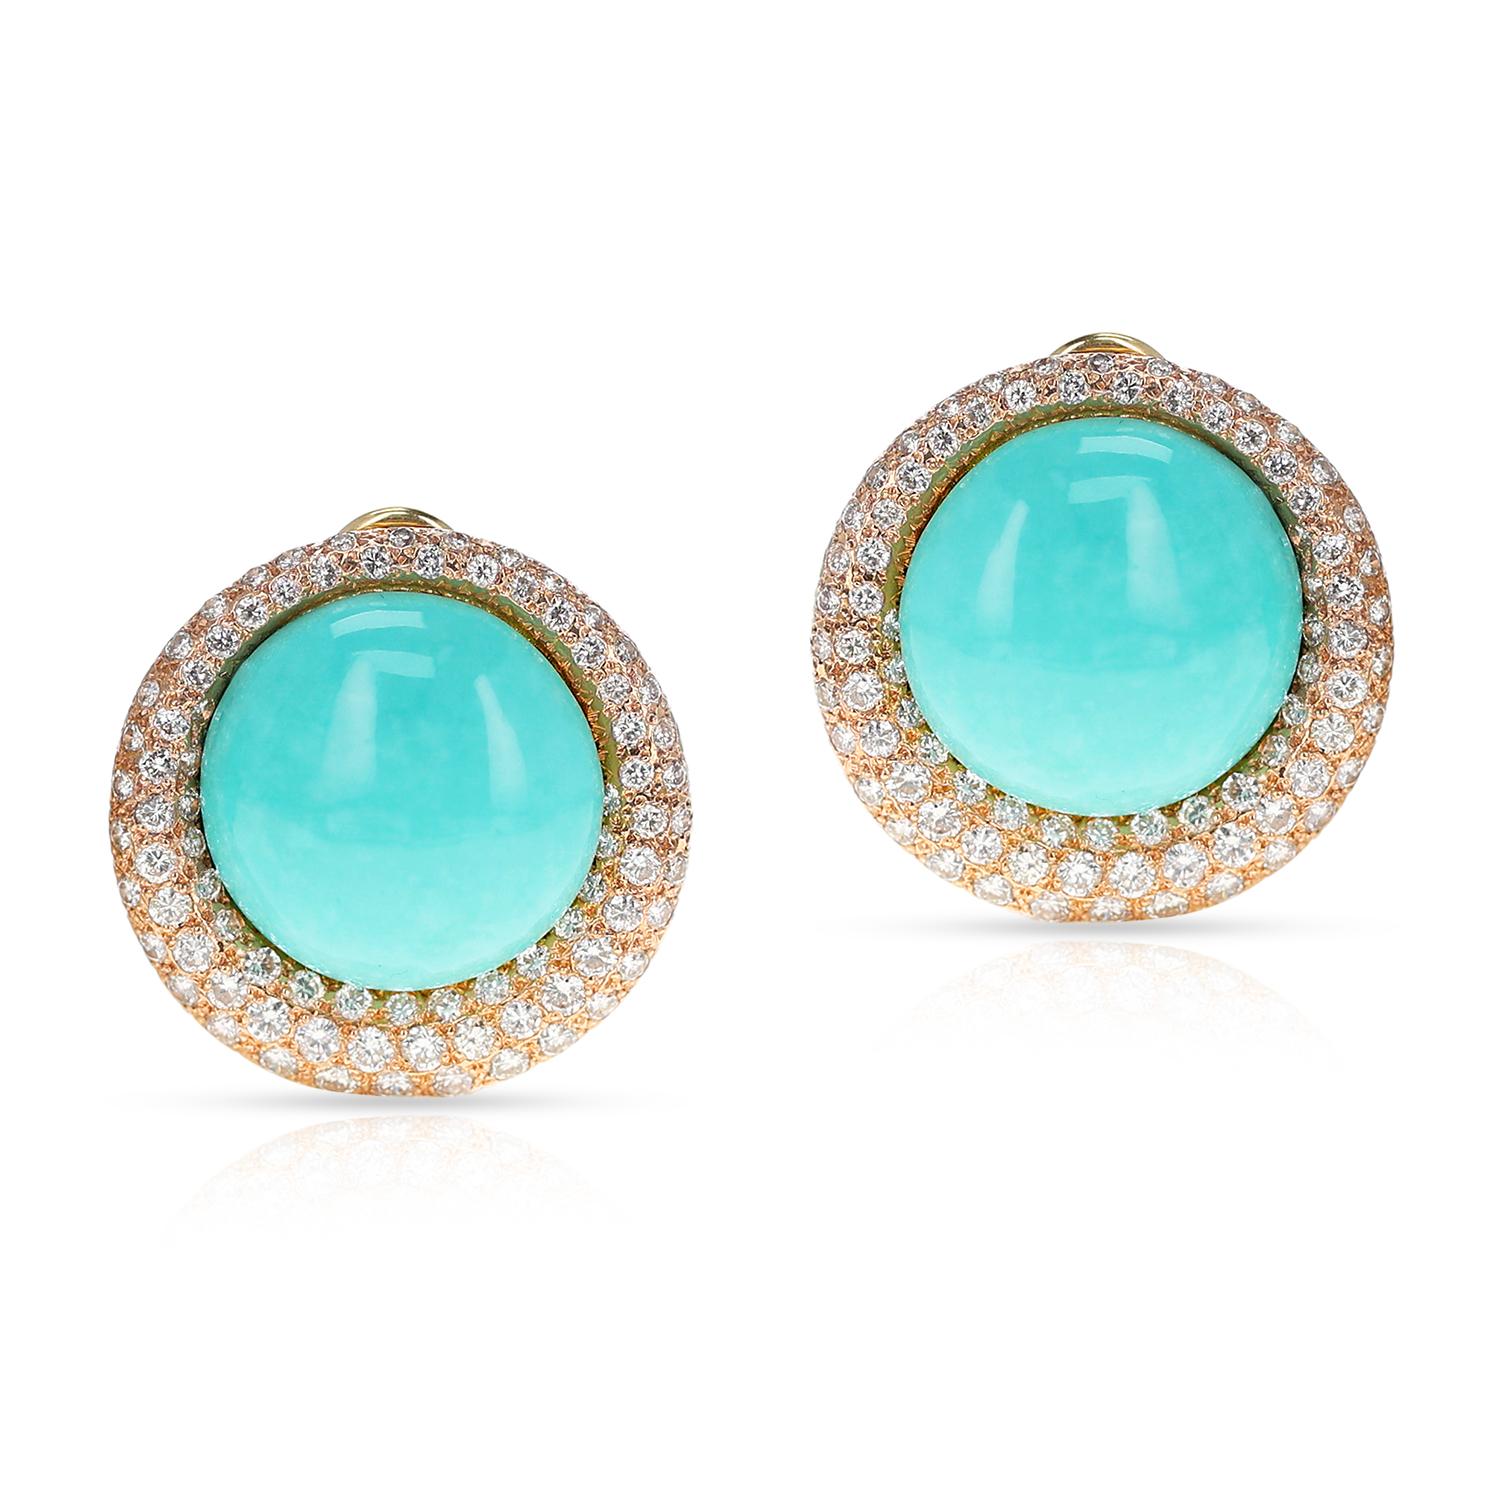 A pair of GIA Certified Natural Turquoise Earrings with Diamonds. The total weight of the earrings is 23.90 grams. The measurement is 20MM of the turquoise. The earrings are made in 14k yellow gold. The total diamond weight is appx. 4 carats. The